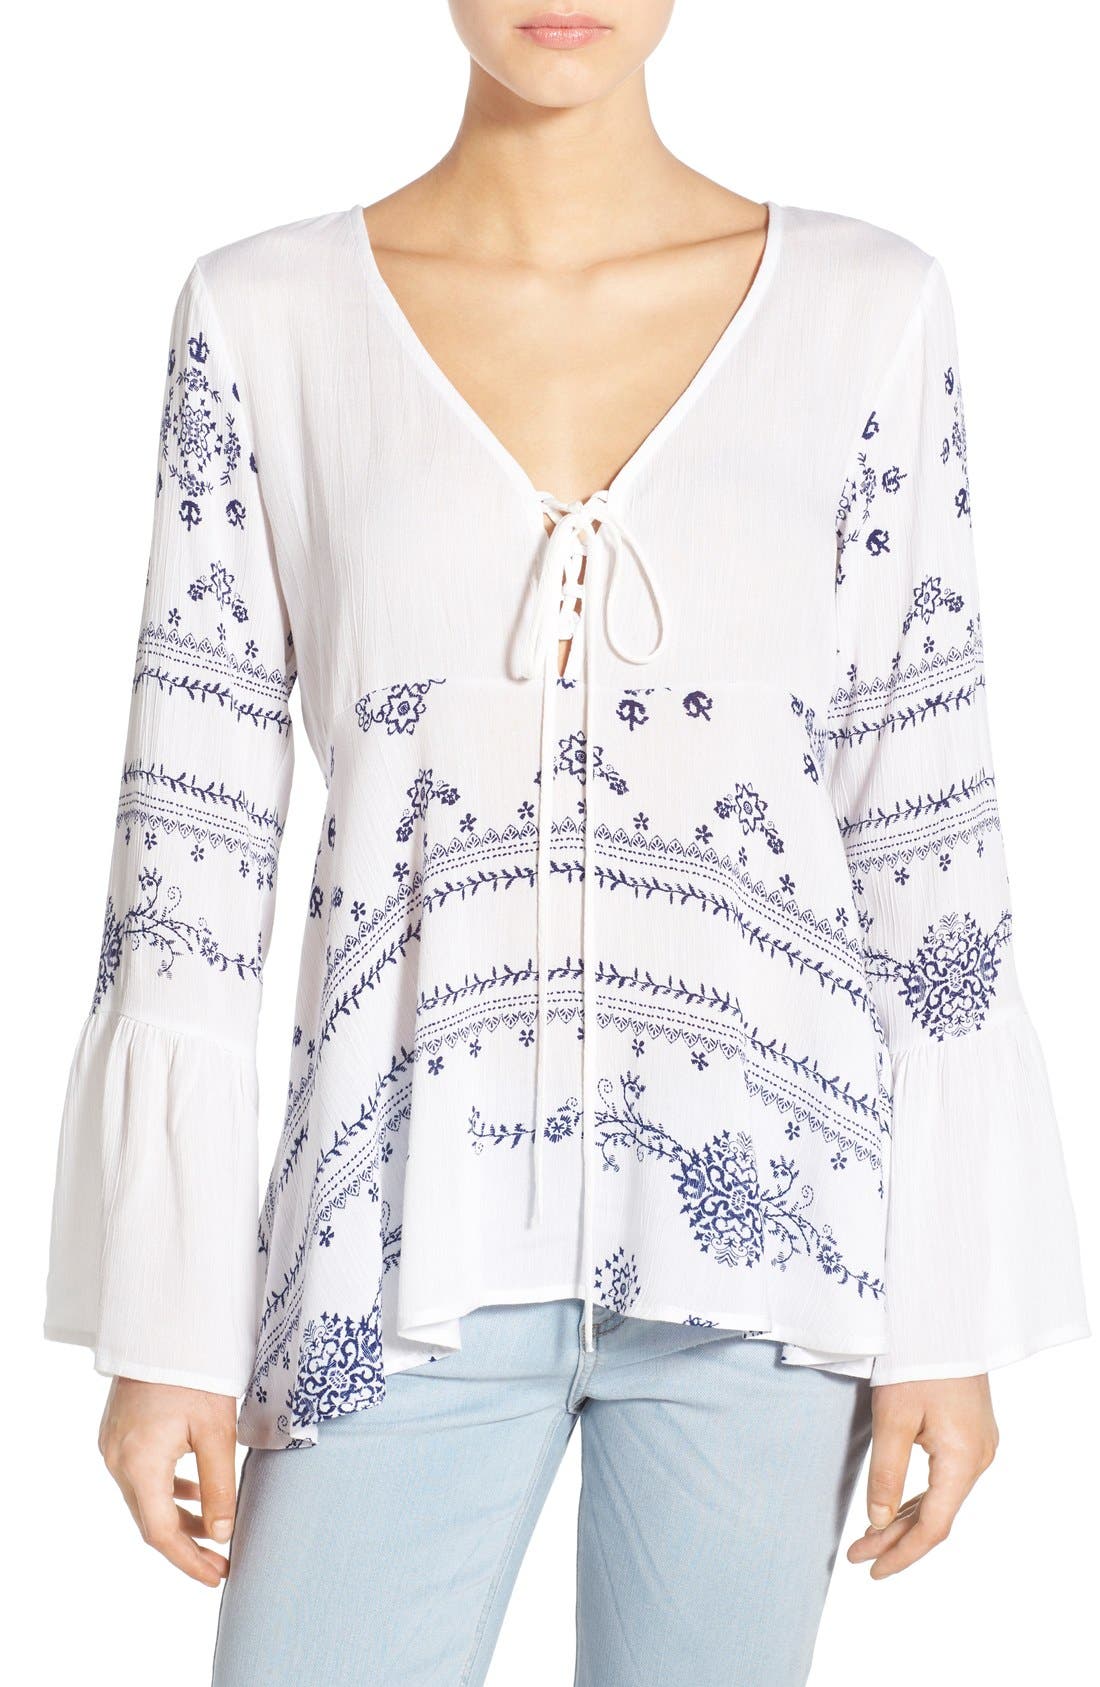 lace up peasant top